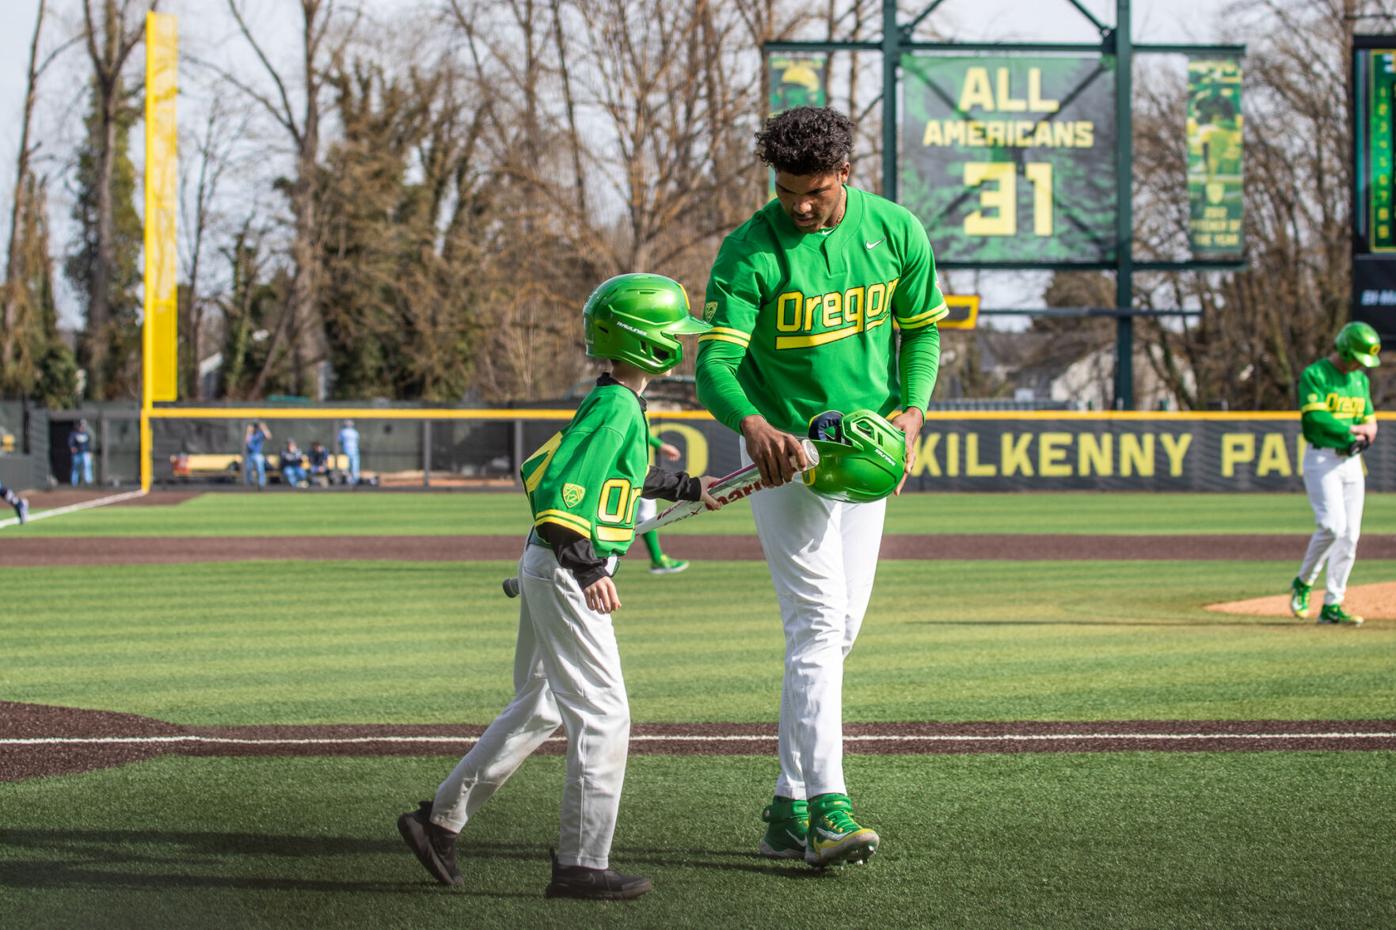 Oregon baseball drops out of polls after being swept by Washington, Sports